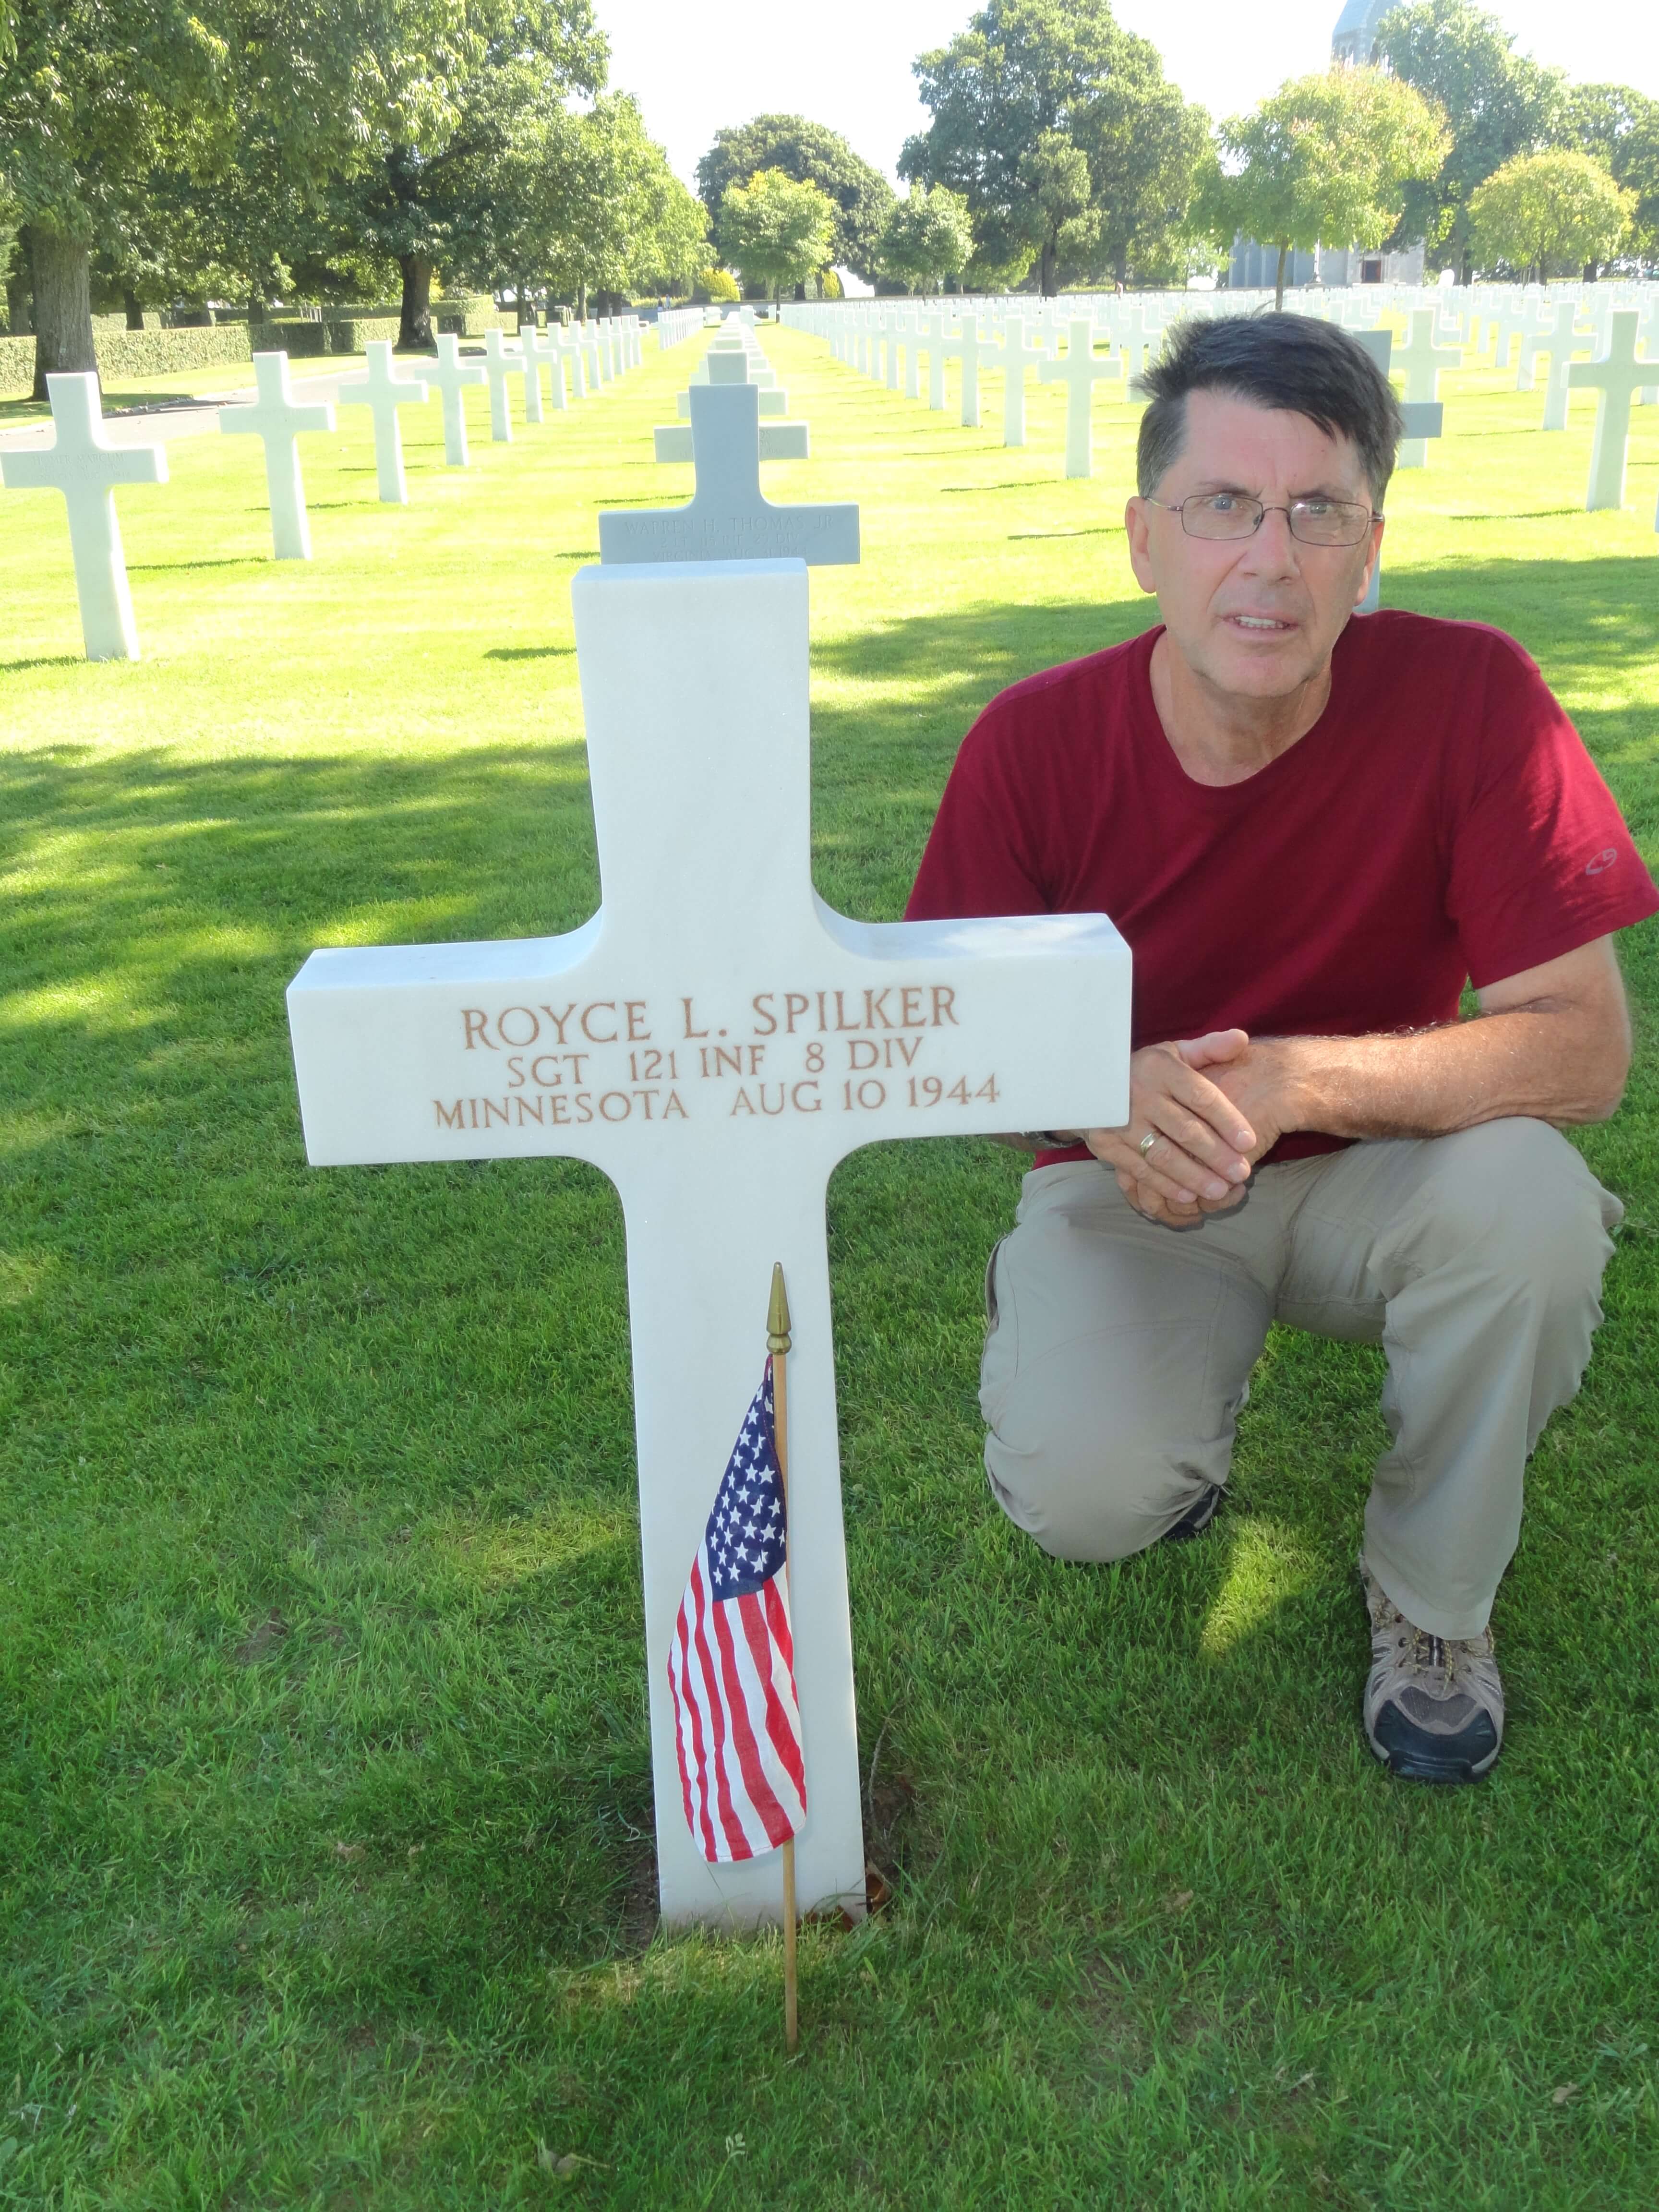 Contemporary photo of an older man squatting beside a cross grave marker for Royce L. Spilker.